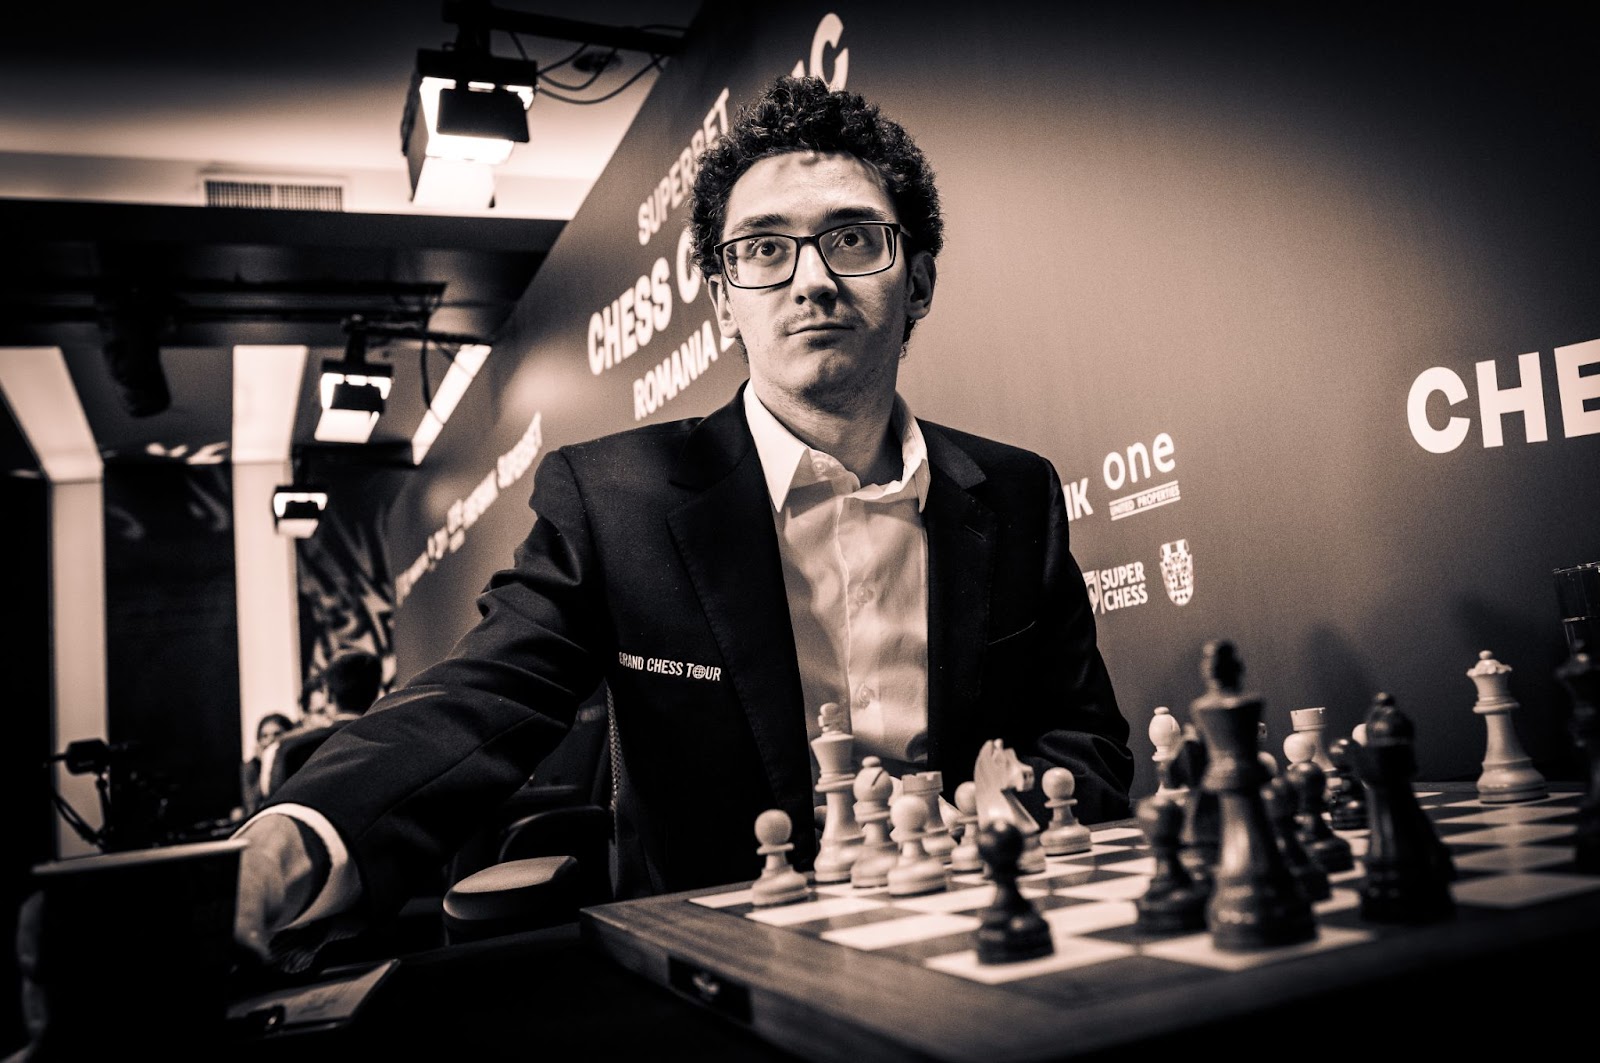 Happy birthday to the 2023 #grandchesstour participant GM Richard Rapport!  Looking forward to seeing you in Romania! #chess #richardrapport